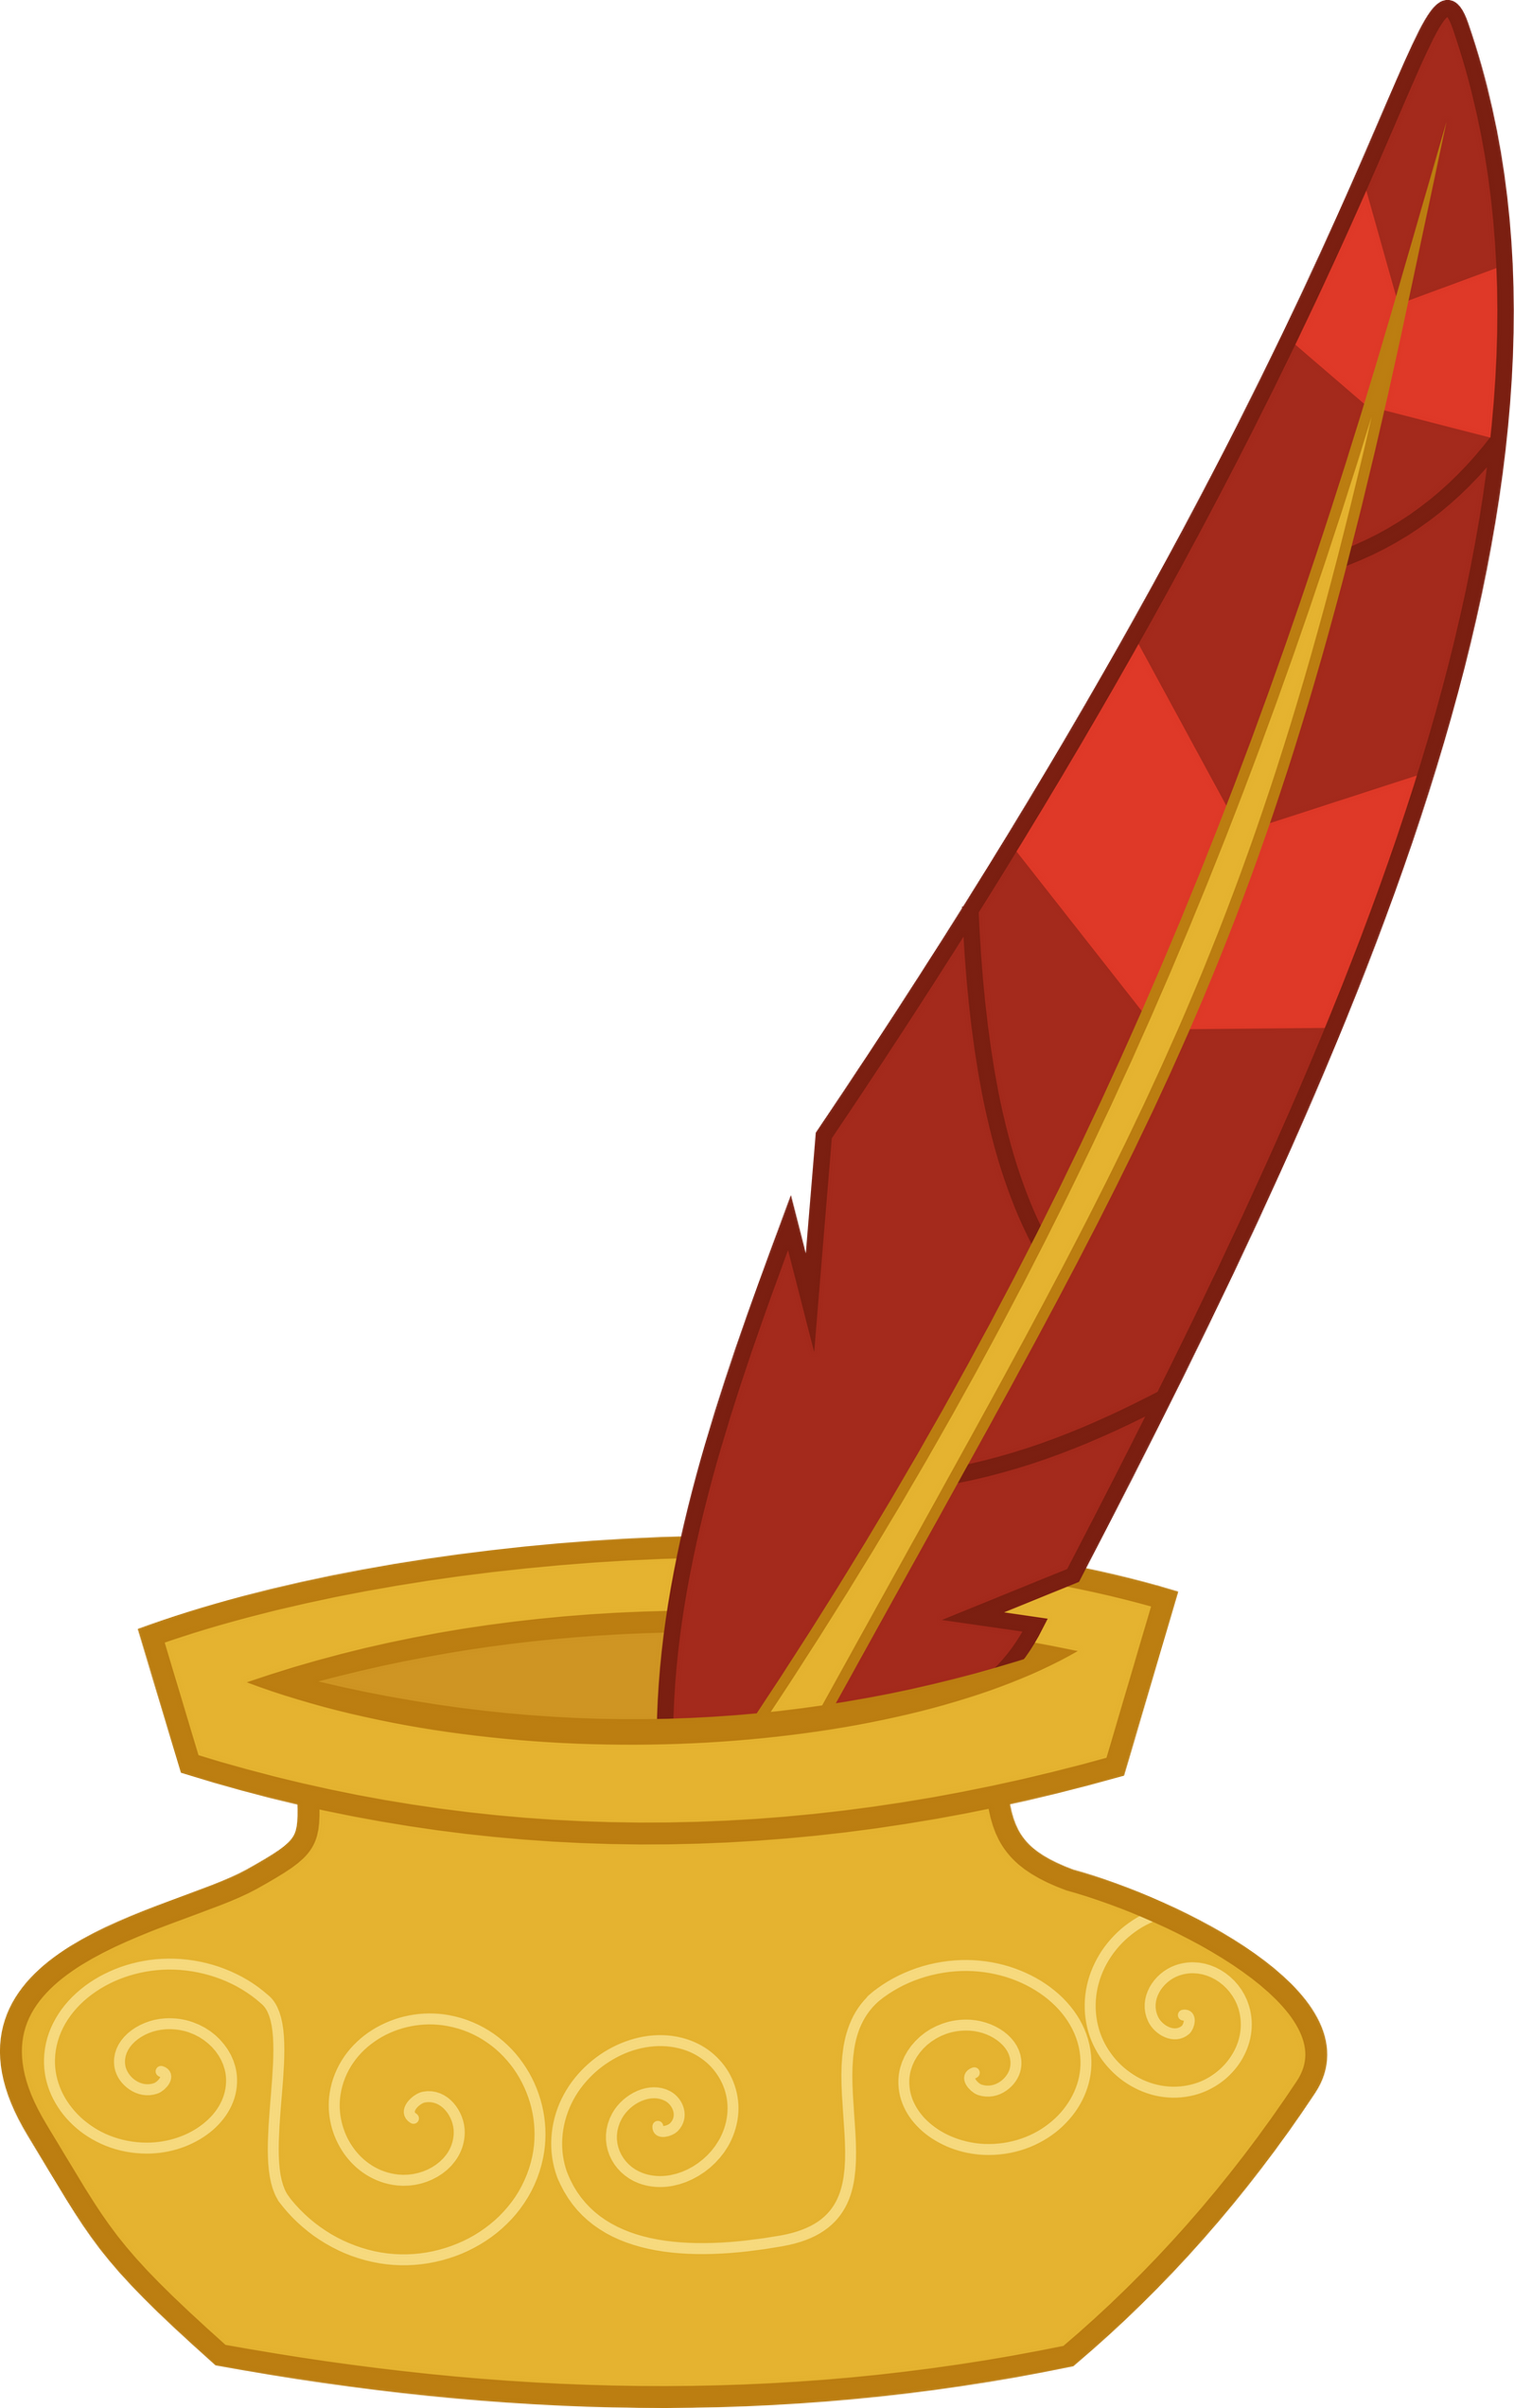 quill clipart - photo #49